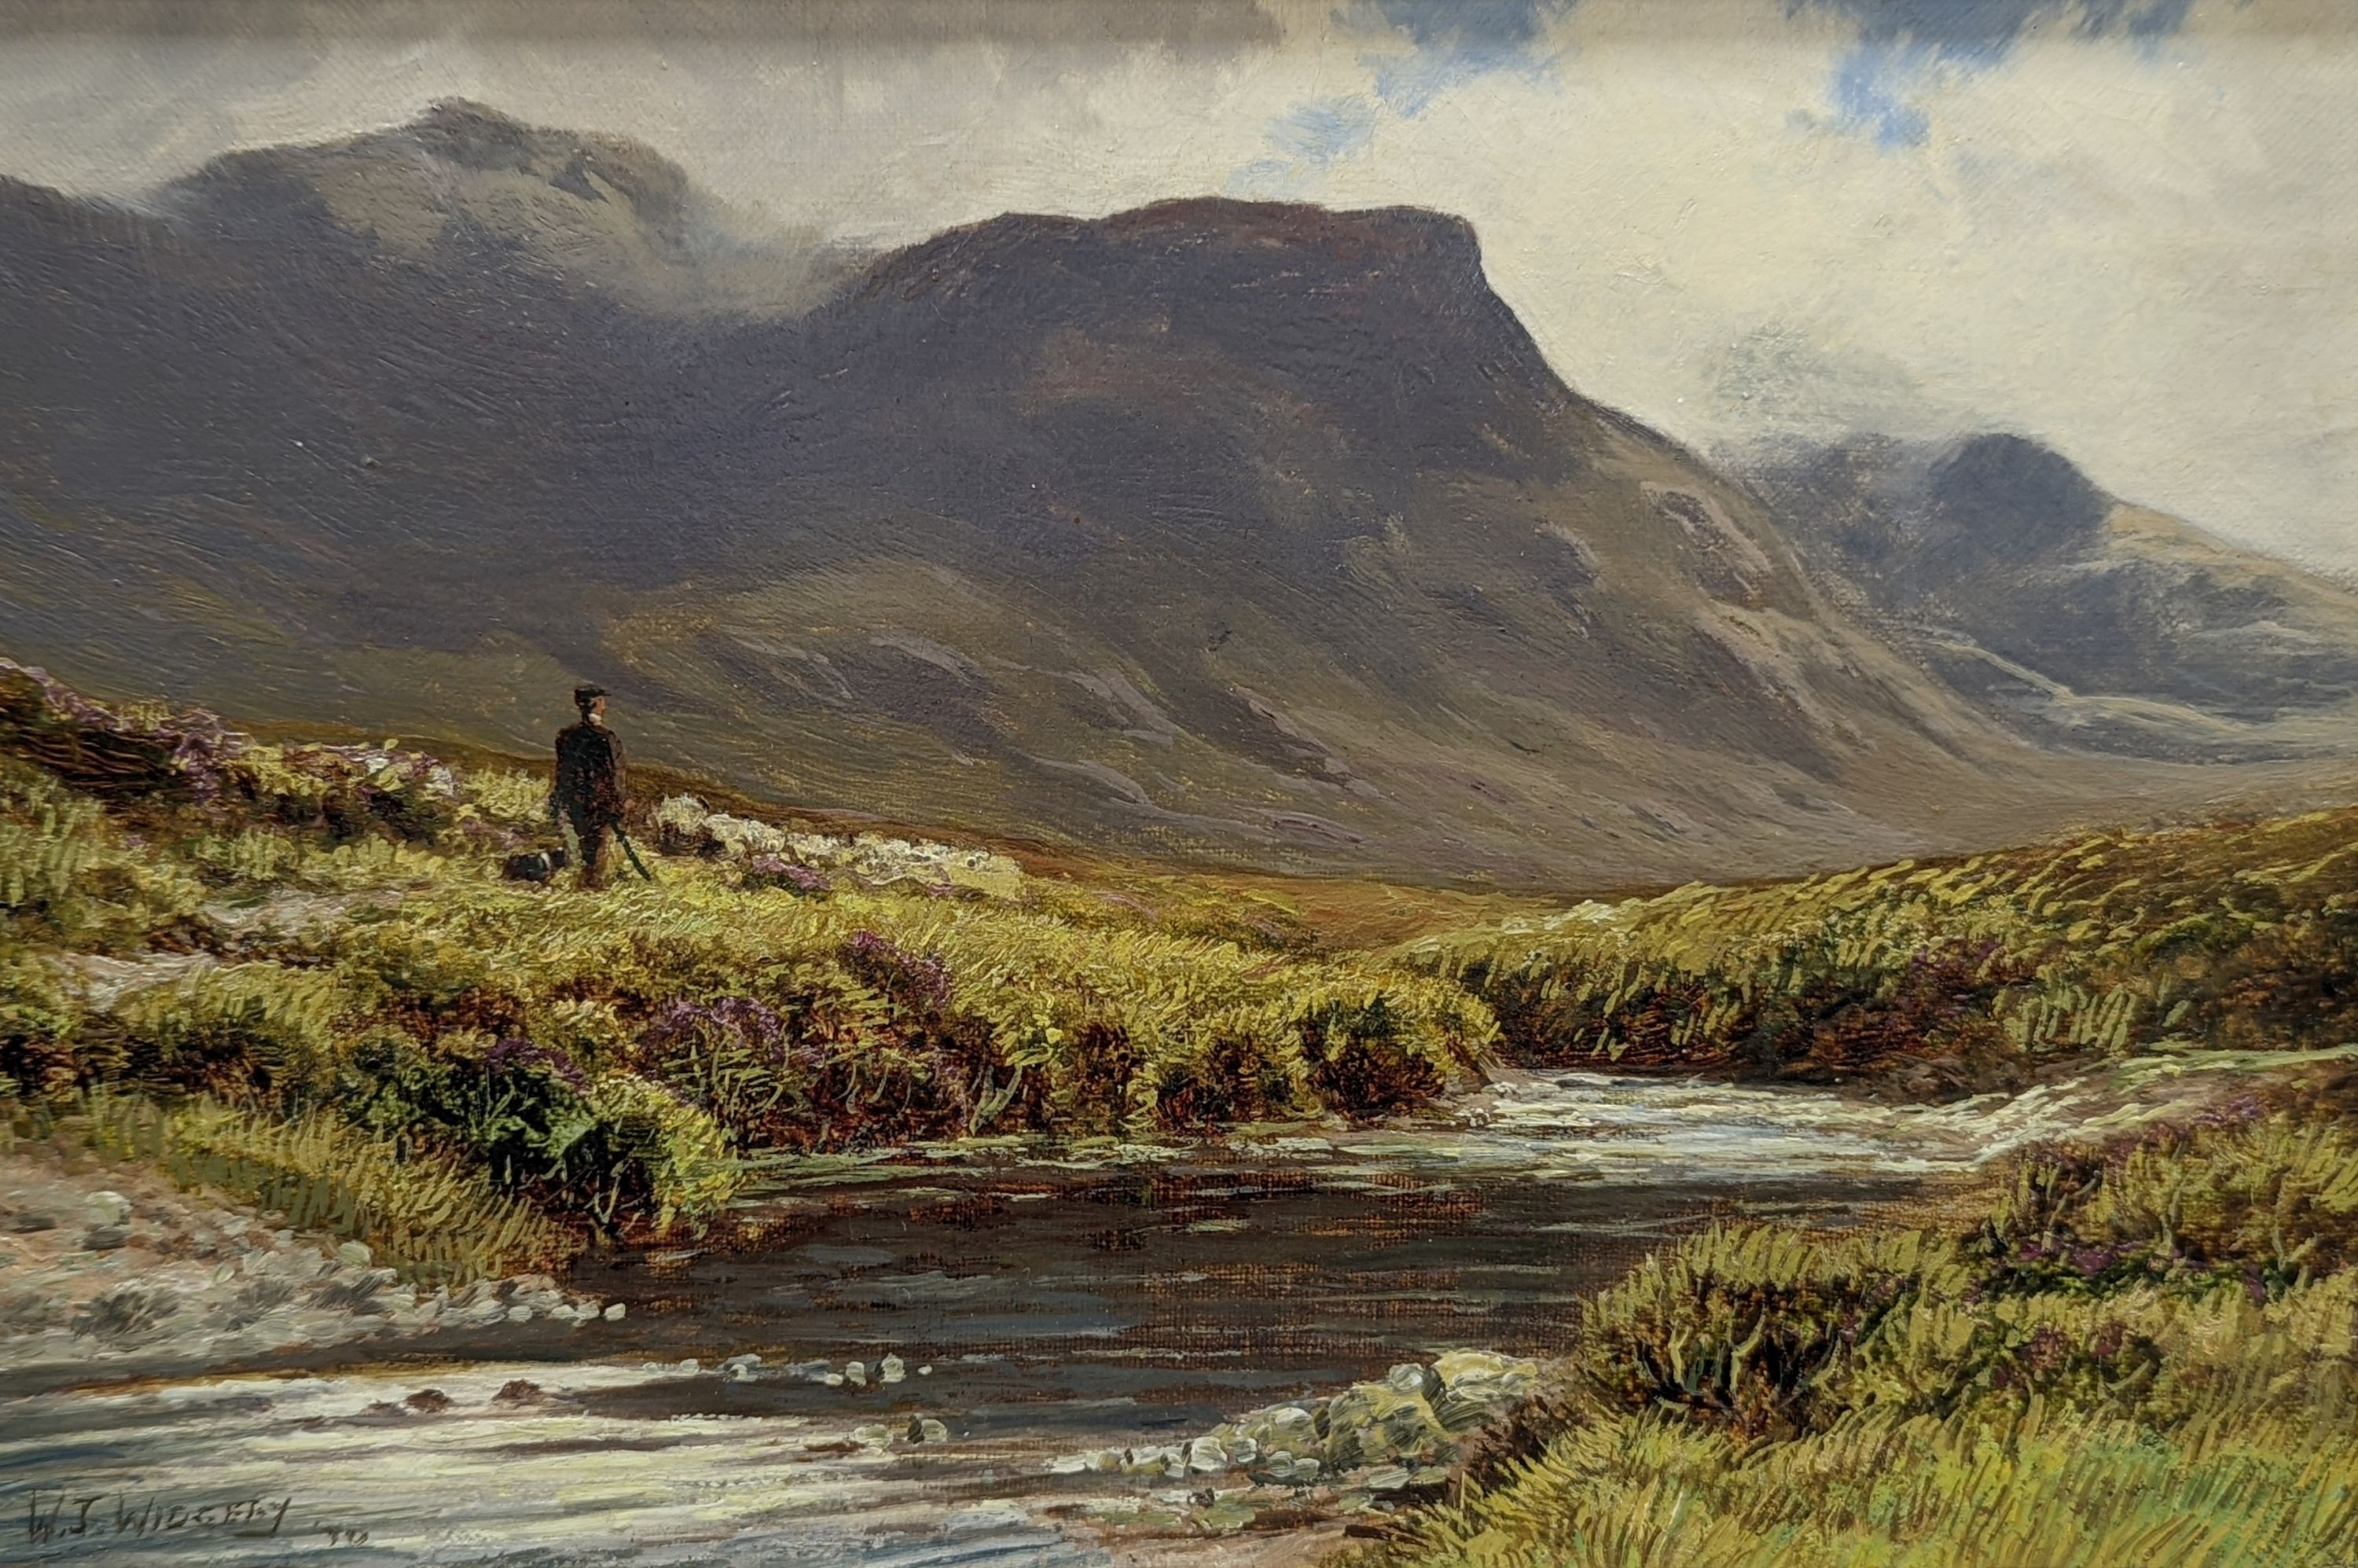 William J. Widgery (1822-1893), oil on canvas, Shepherd and flock in a Highland landscape, signed, 20 x 30cm